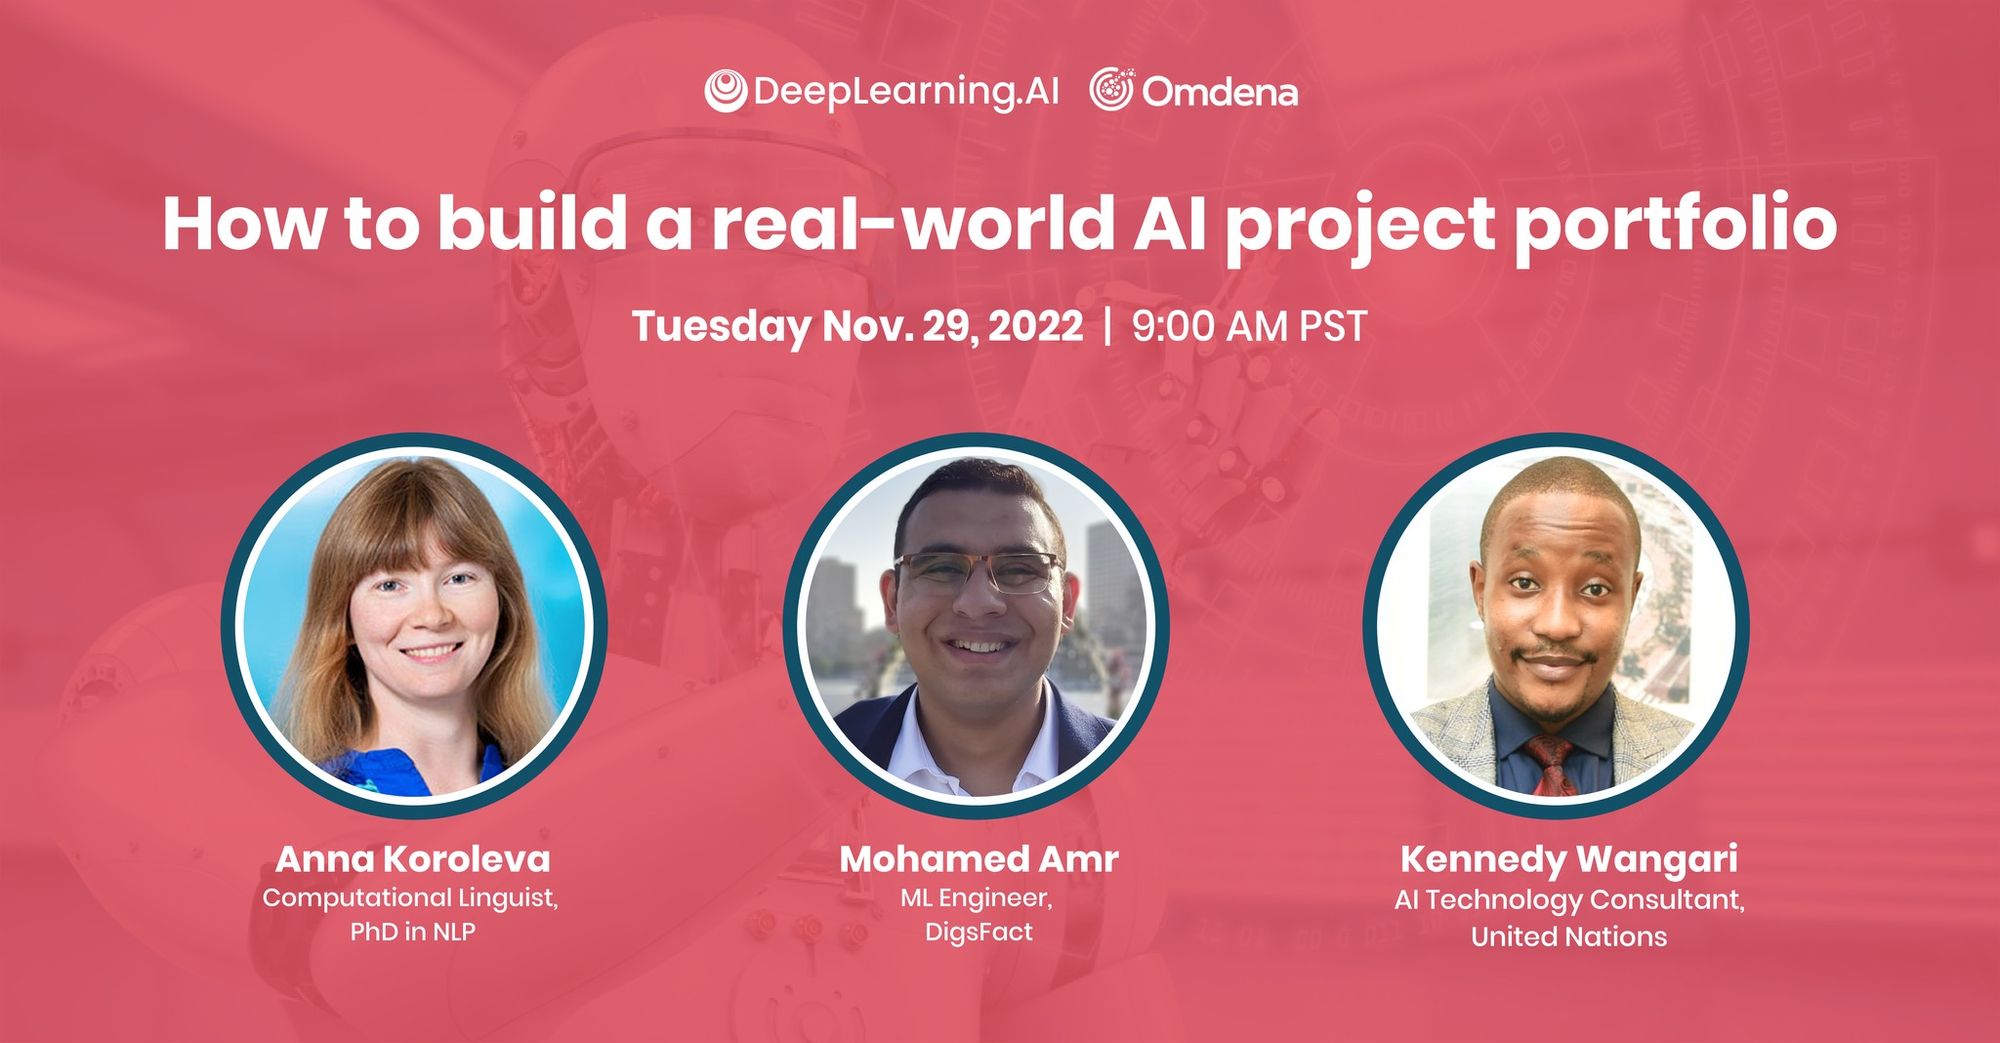 Banner ad for upcoming panel discussion "How to build a real-world AI project portfolio"